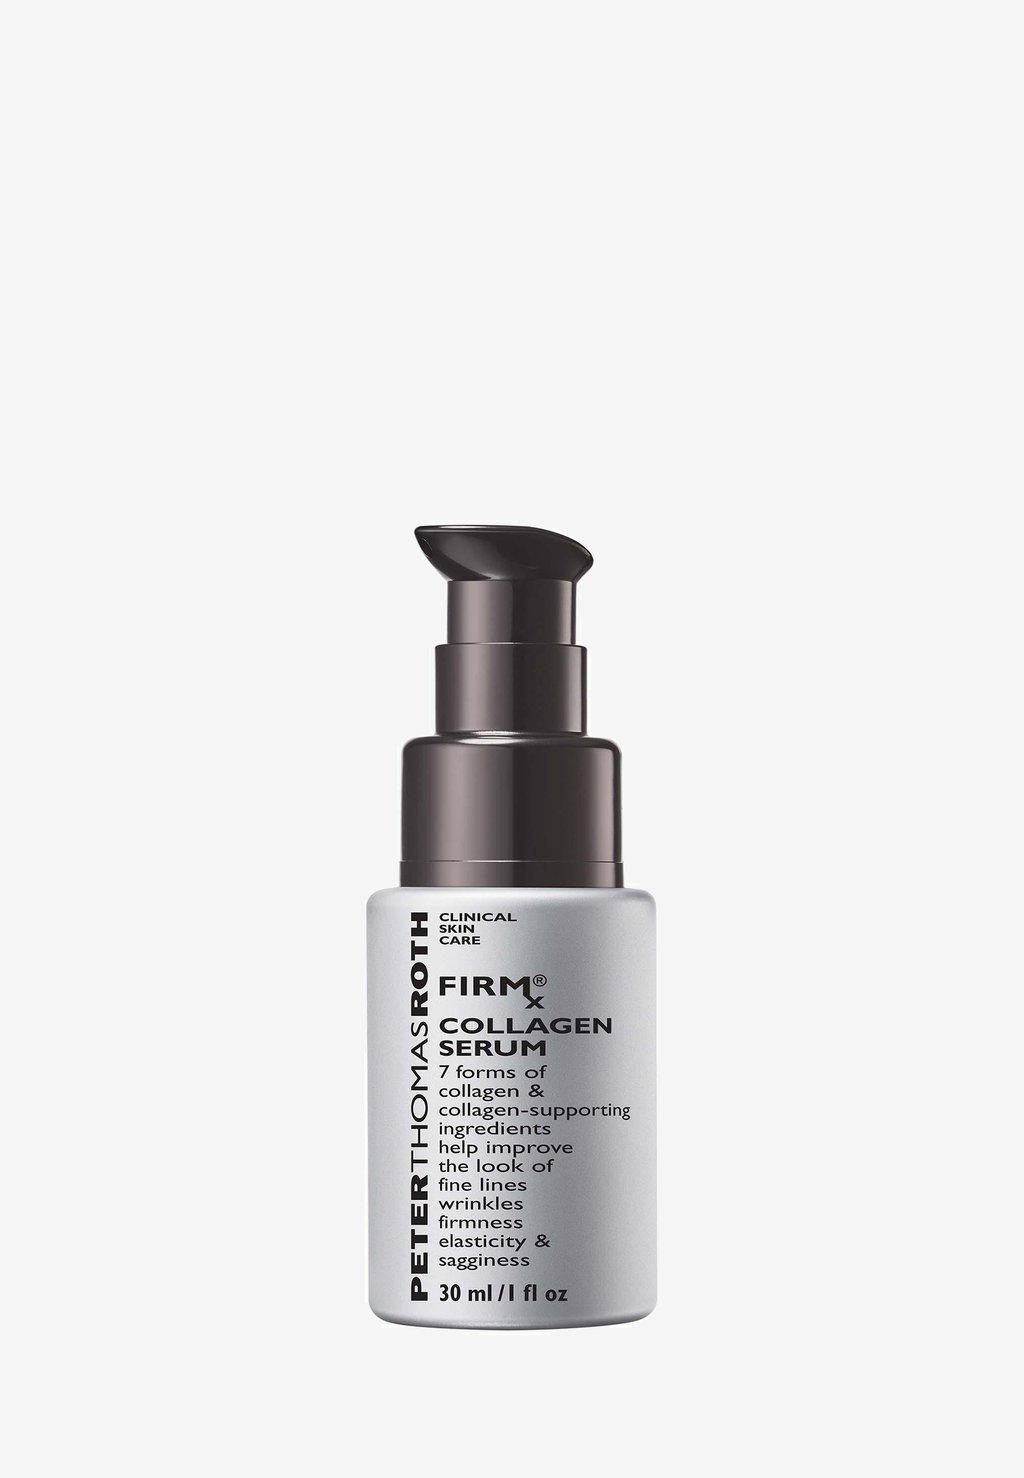 Сыворотка Firmx Коллагеновая Сыворотка Peter Thomas Roth peter thomas roth pampkin enzyme mask